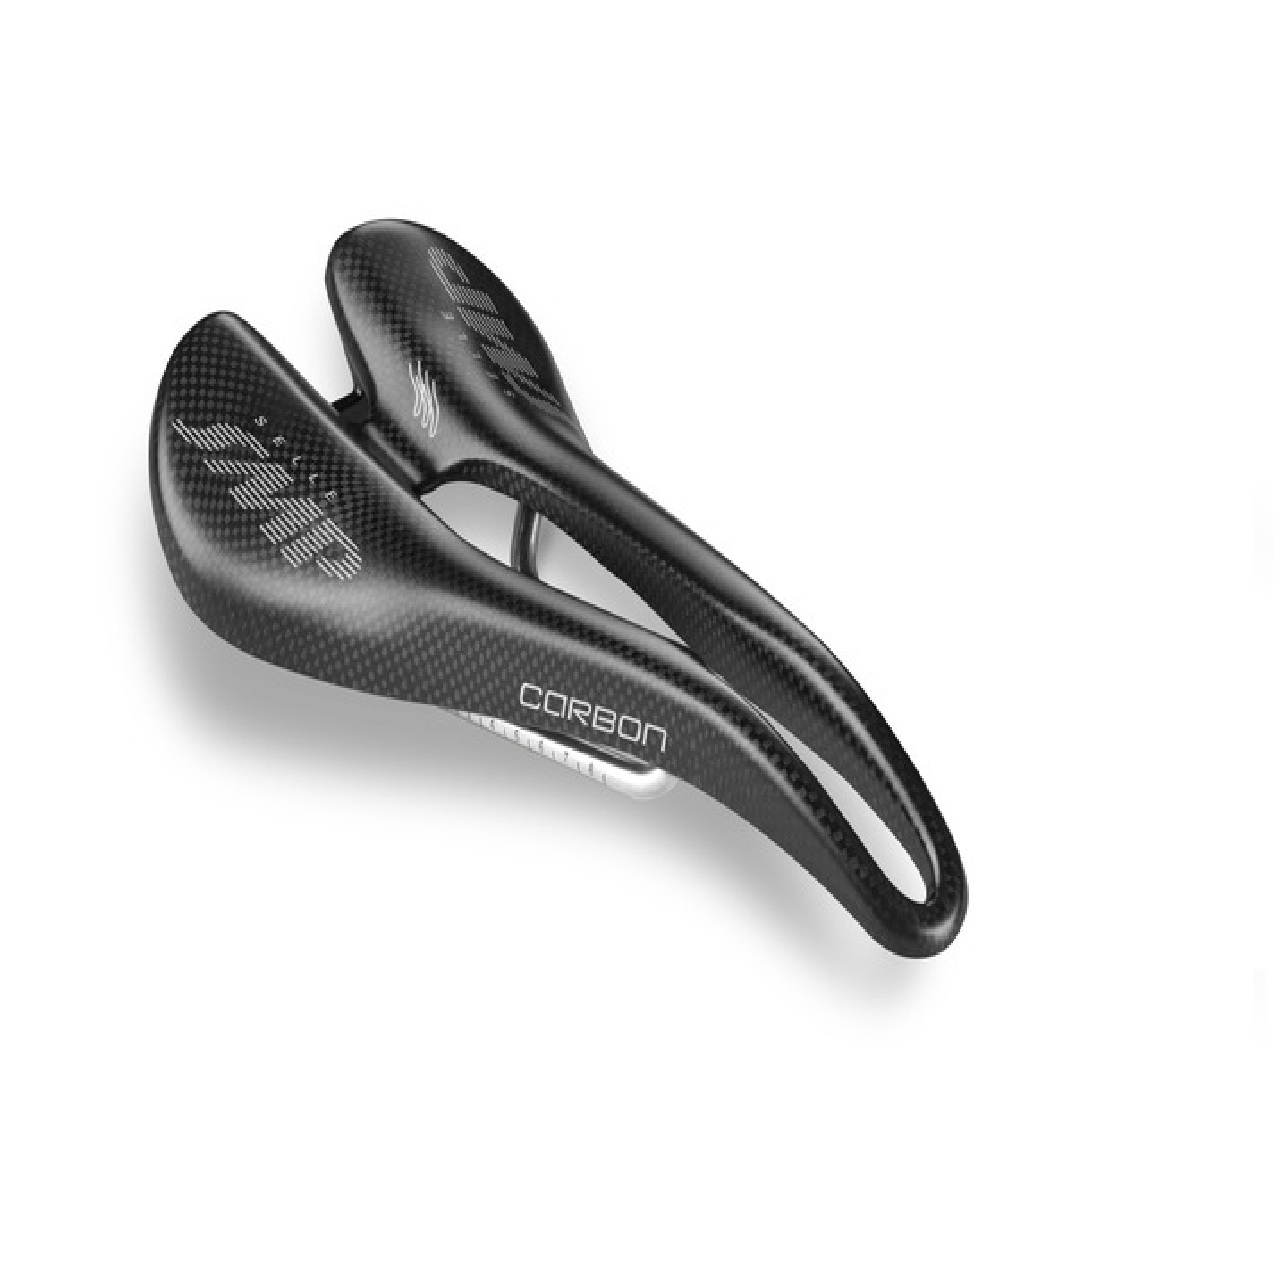 Selle SMP Carbon Pro Bike Saddle with Steel Rails